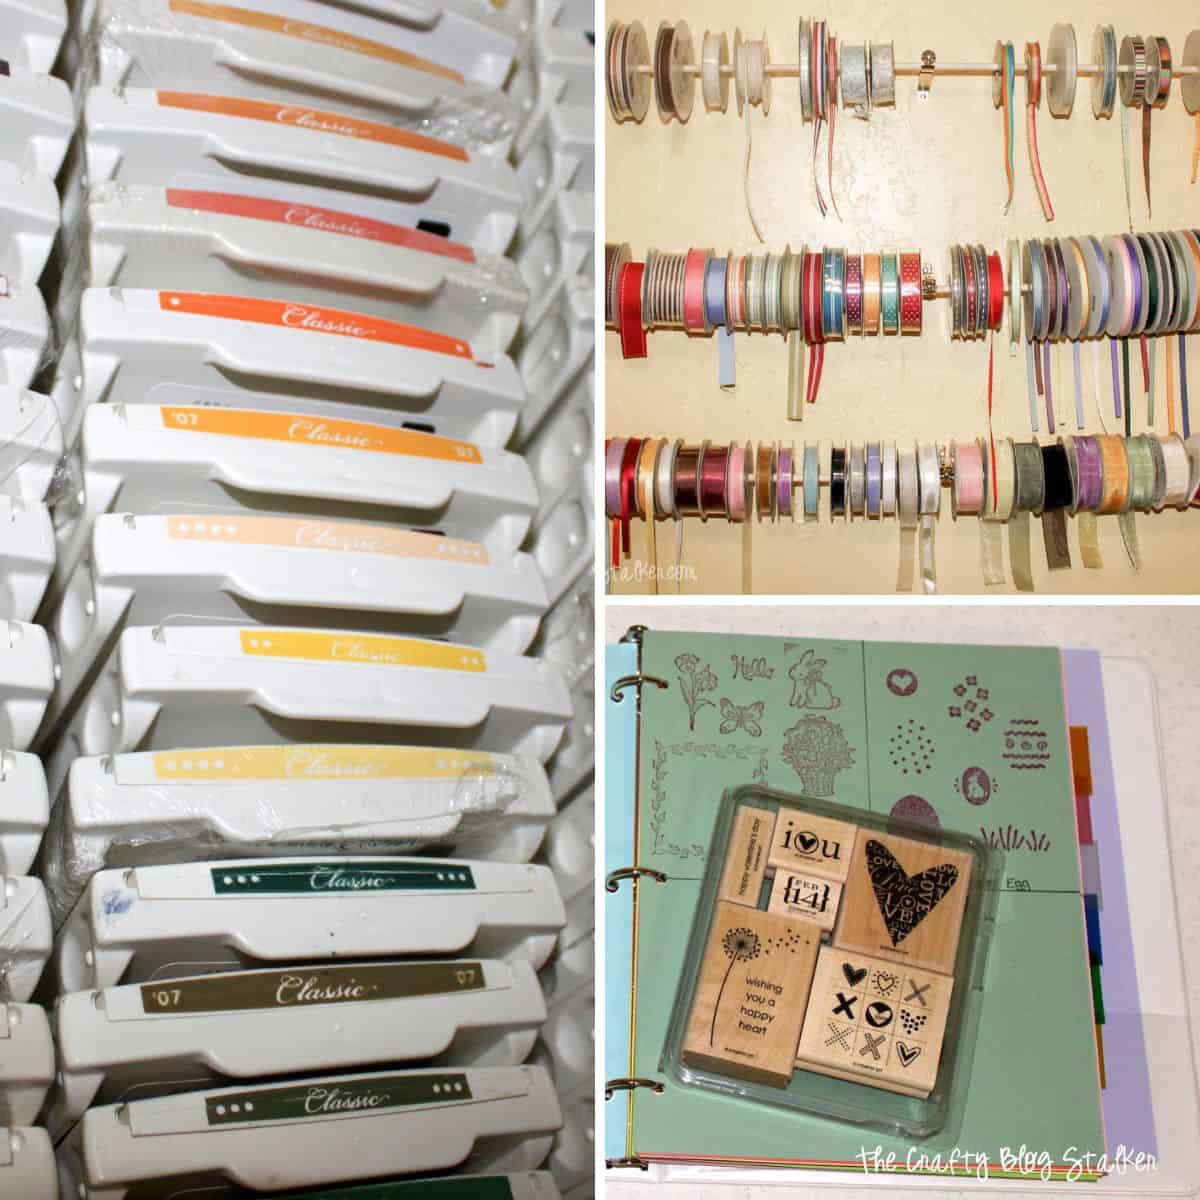 4 Budget Friendly Organization Solutions in My Craft Room